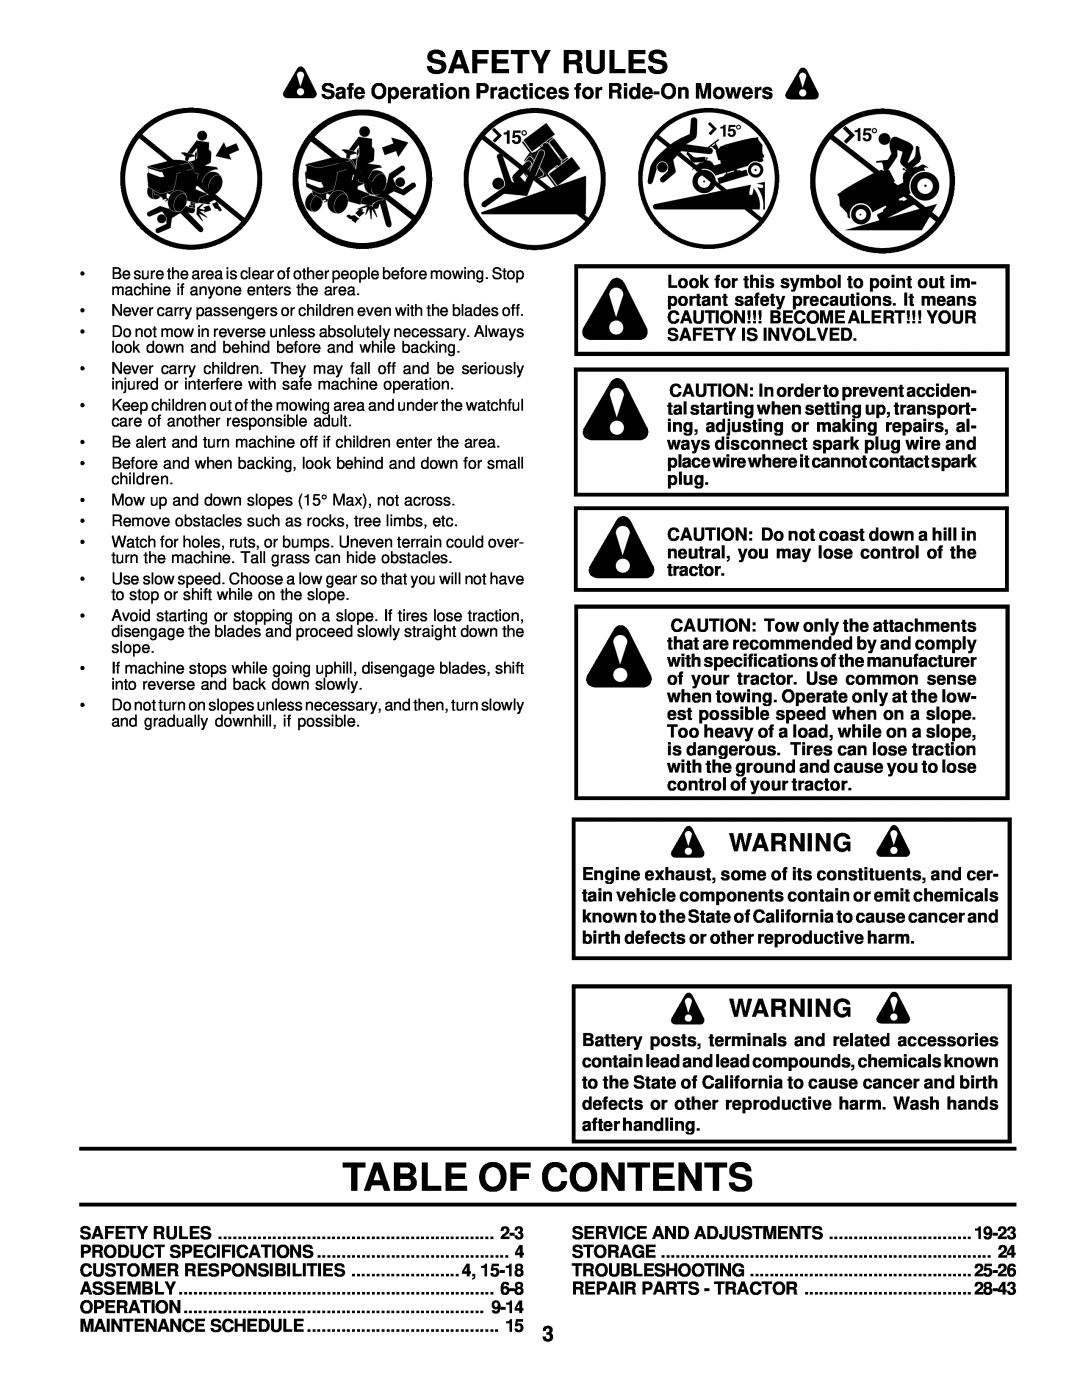 Weed Eater 177019 manual Table Of Contents, Safety Rules, Safe Operation Practices for Ride-On Mowers 